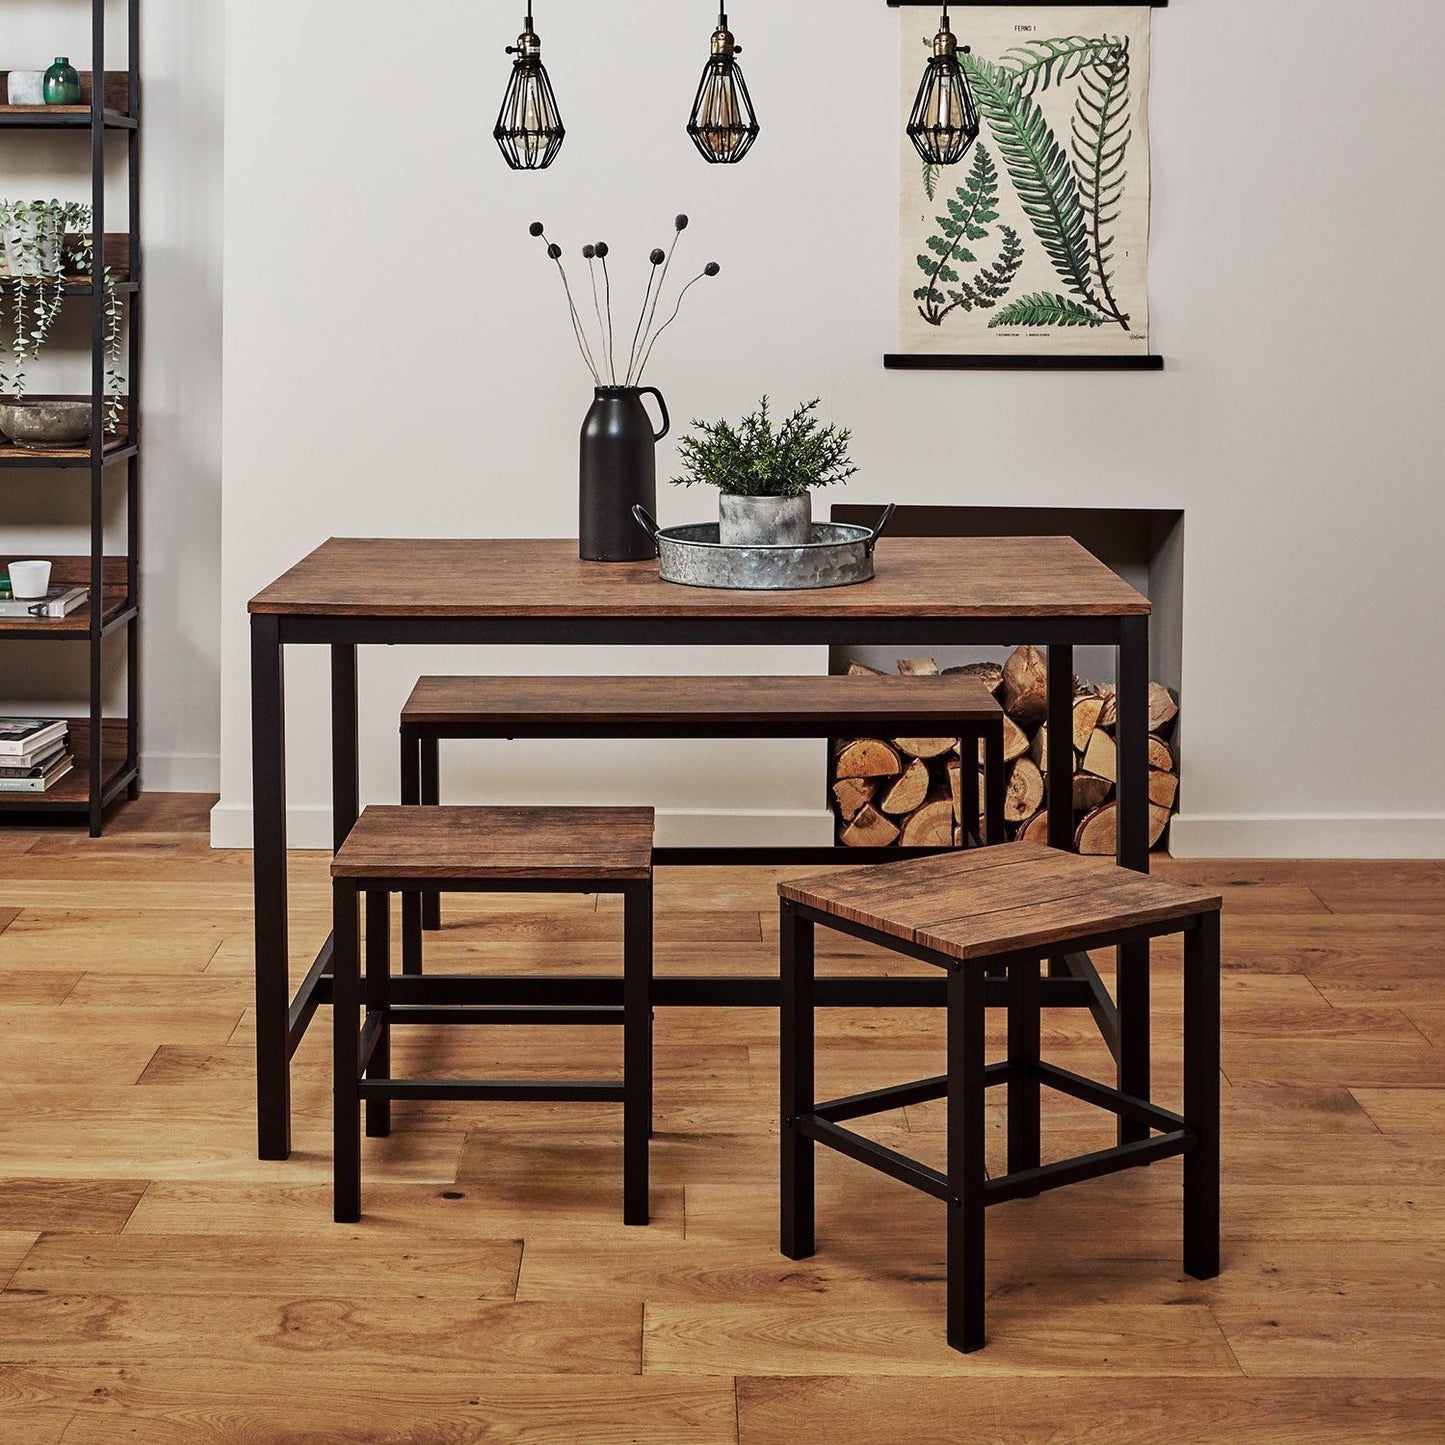 Sheffield dining table set – 4 seater – dining bench and 2 stools - Laura James